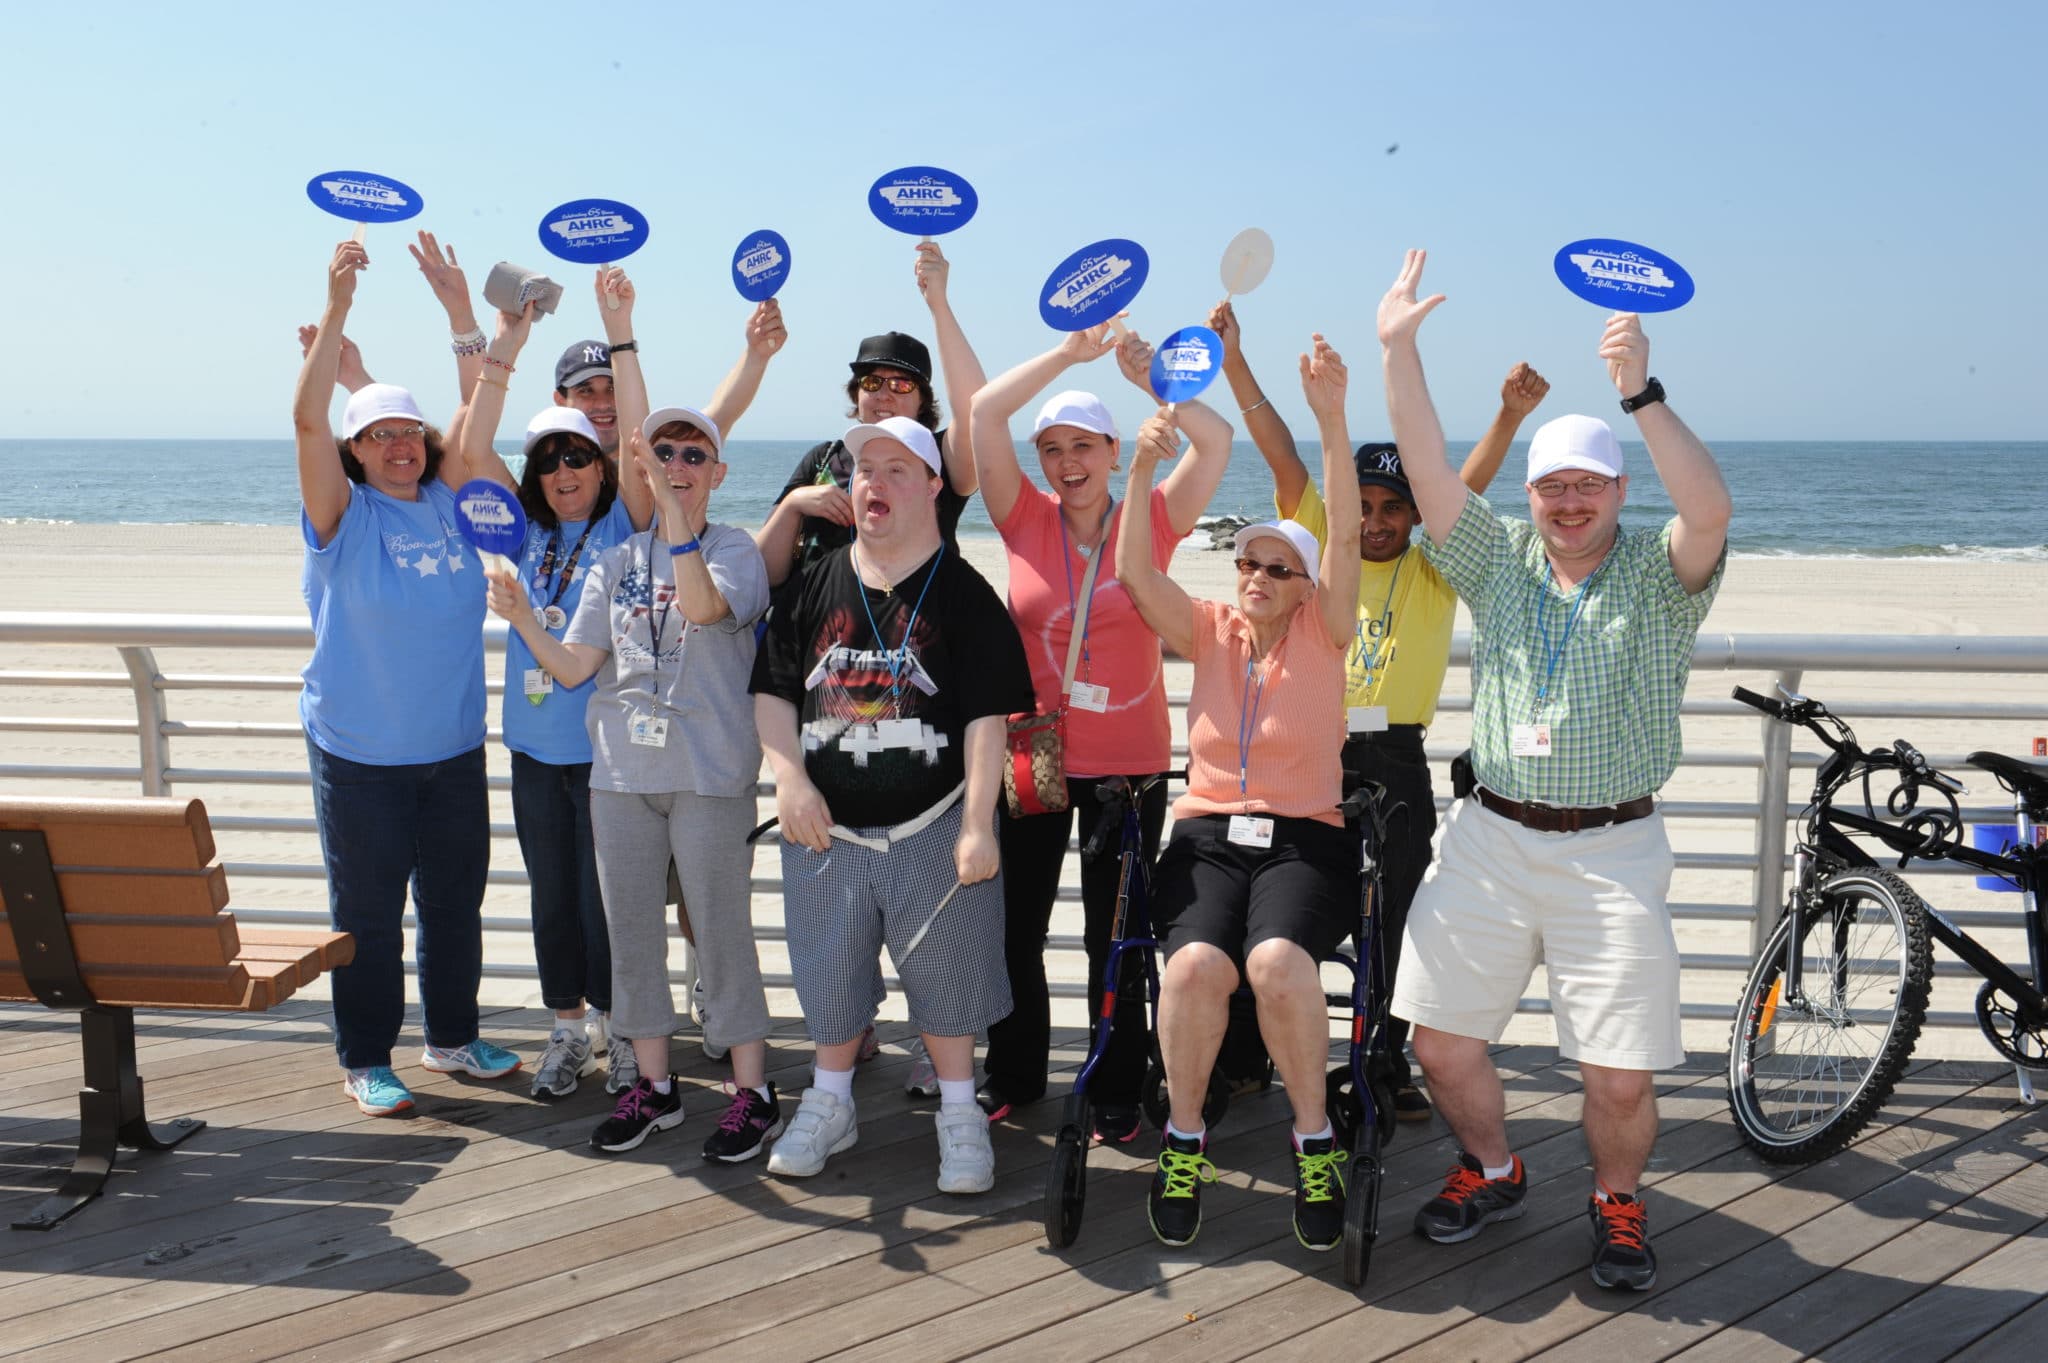 A group from AHRC Nassau cheers on the Long Beach boardwalk.